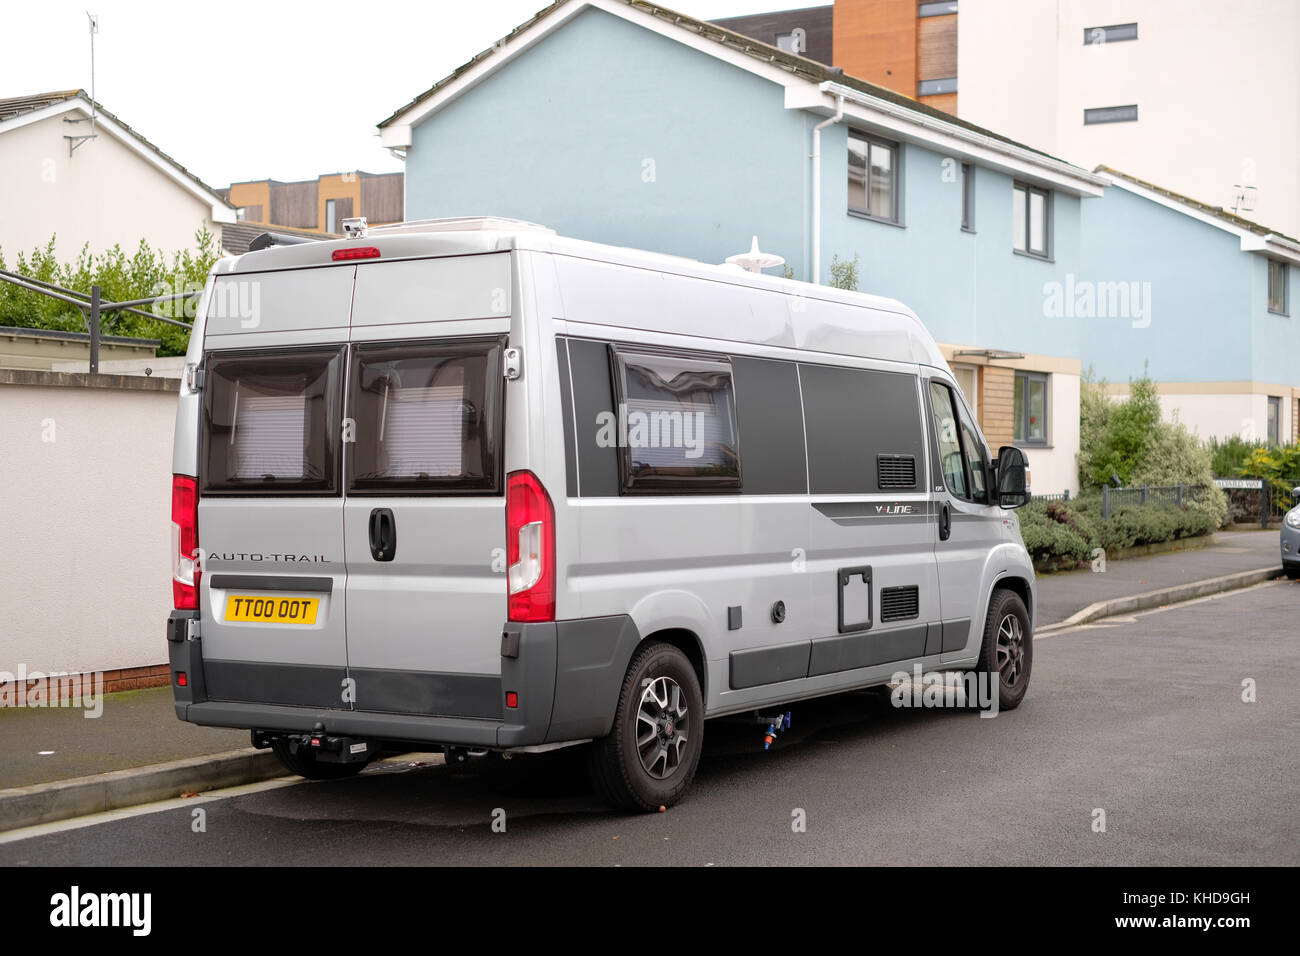 November 2017 - Camper van parked in a residential street, as the owner has  no off street parking avilable in a suburbam environment Stock Photo - Alamy